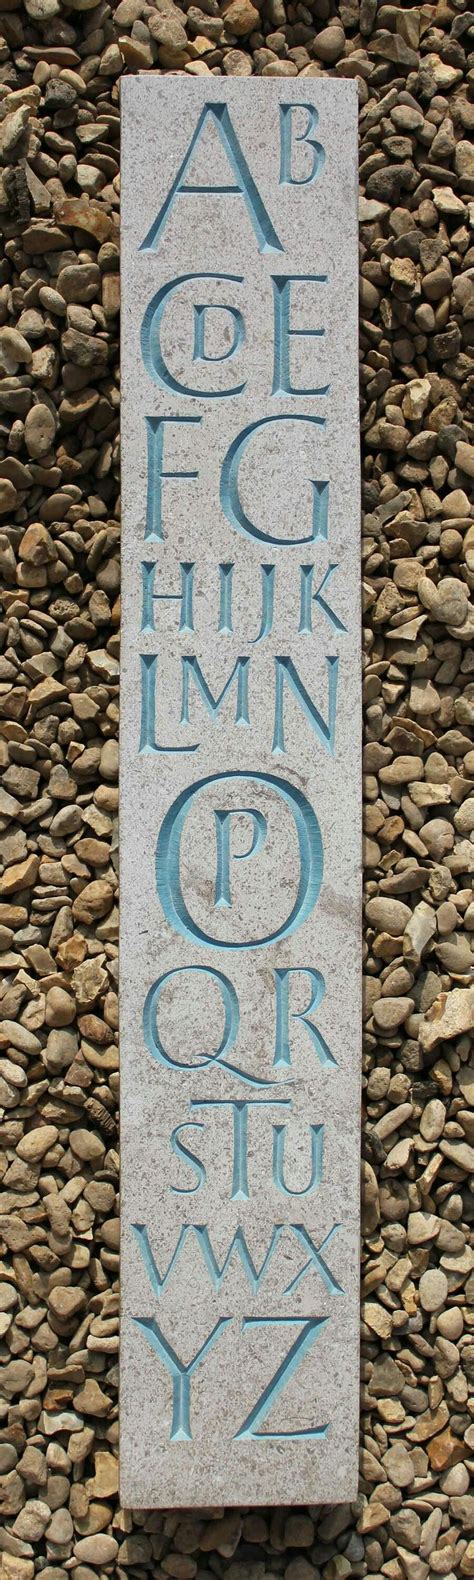 Pin By Sergi Valls On Pirate Medalion Lettering Carving Stone Carving